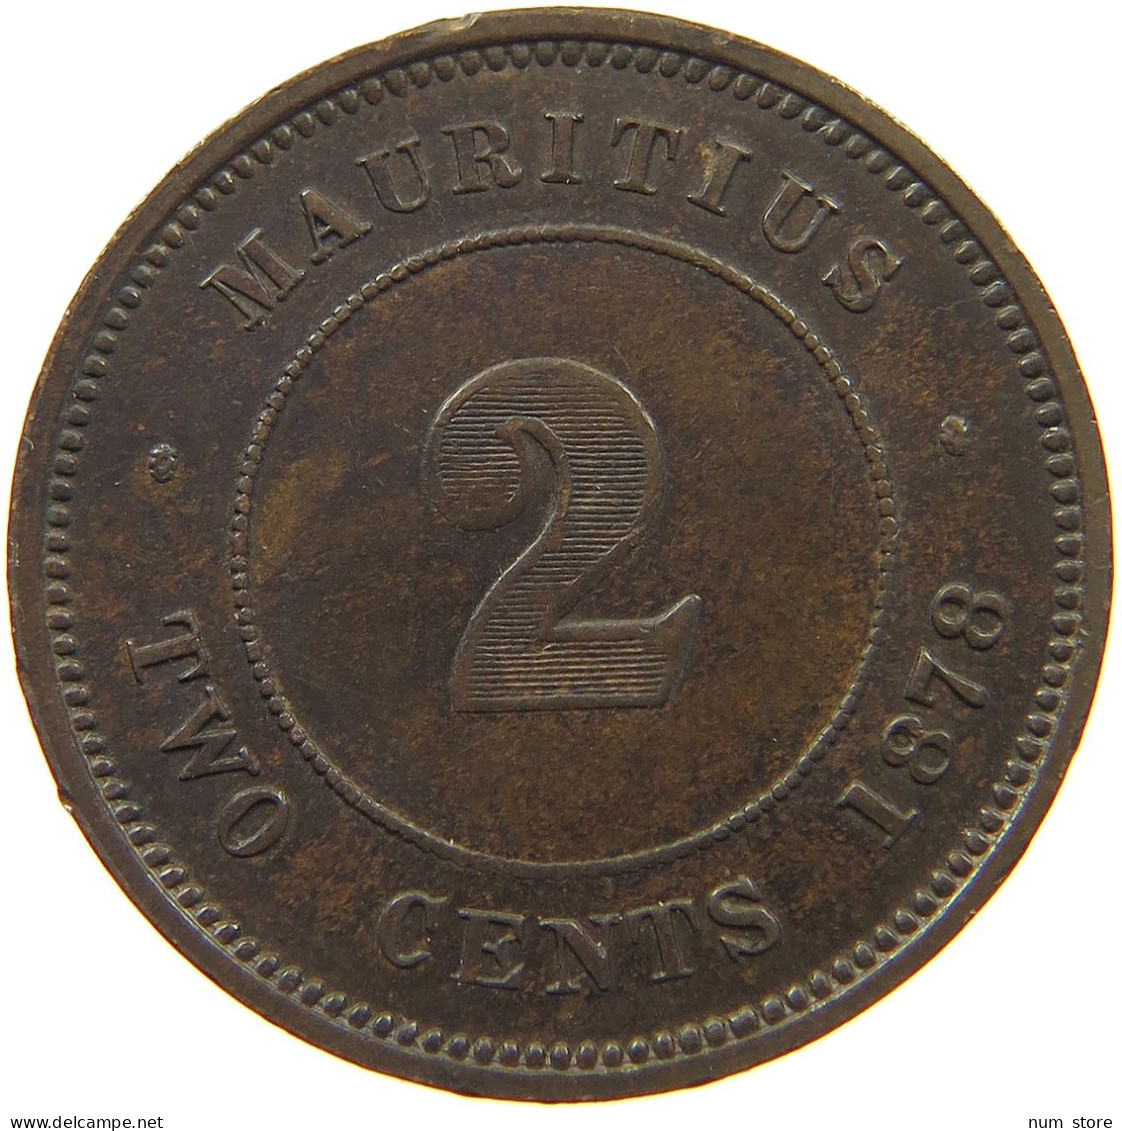 MAURITIUS 2 CENTS 1878 Victoria 1837-1901 #t112 1191 - Maurice